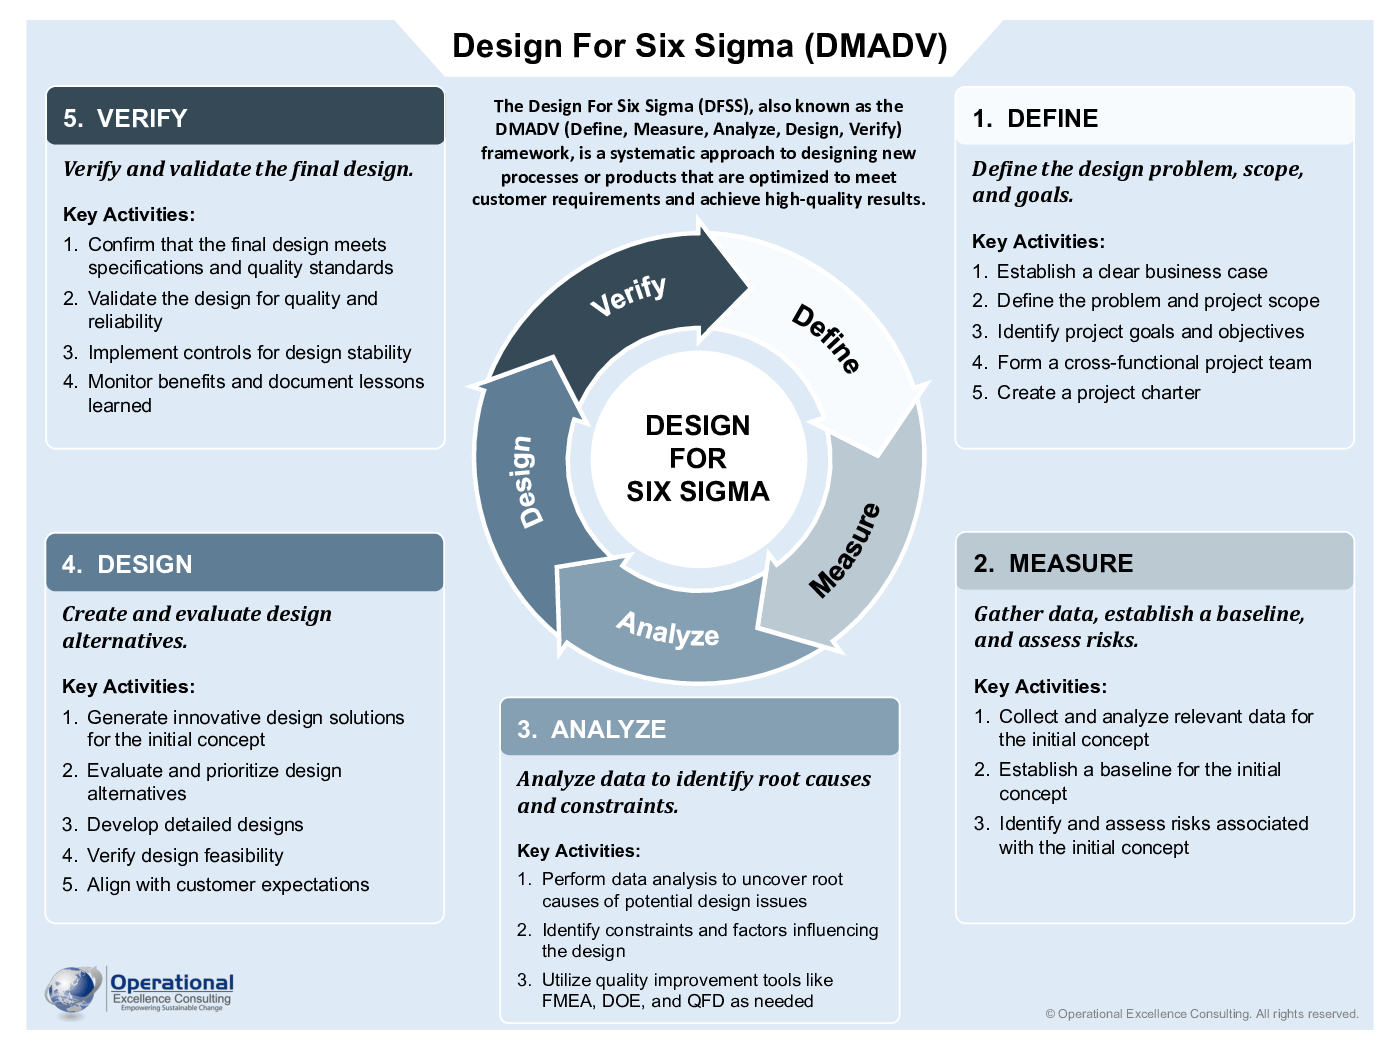 Design for Six Sigma (DMADV) Poster